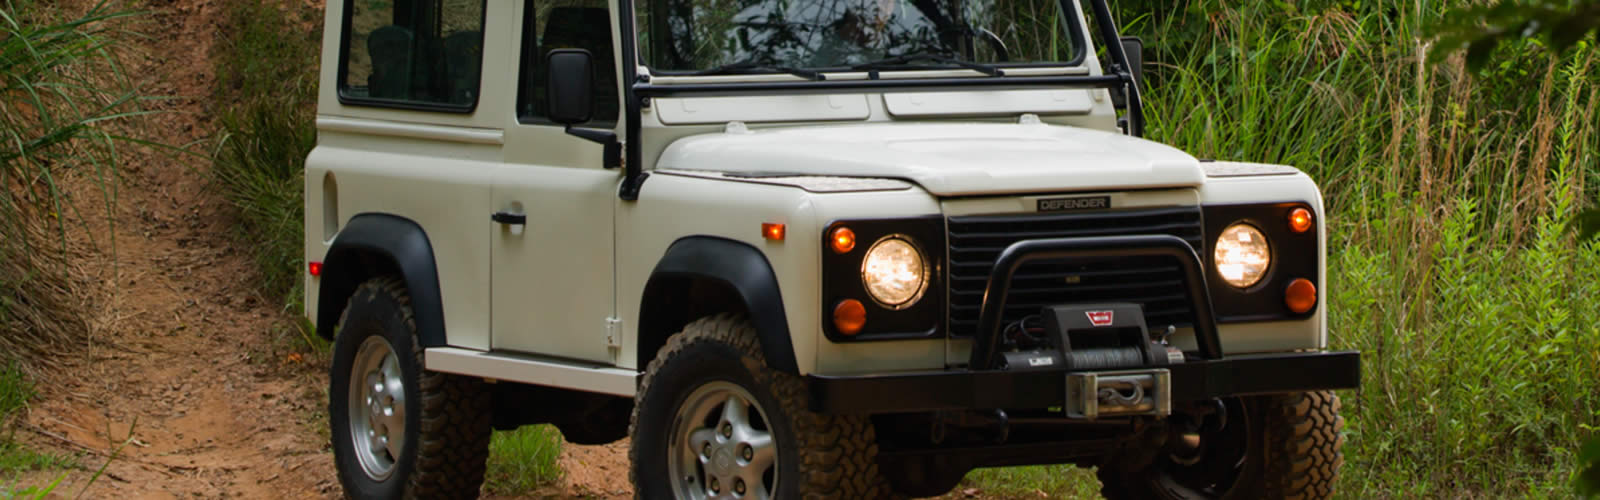 REFINE YOUR OFF ROAD DRIVING TECHNIQUES WITH THE LAND ROVER FAMILY.<br><br>